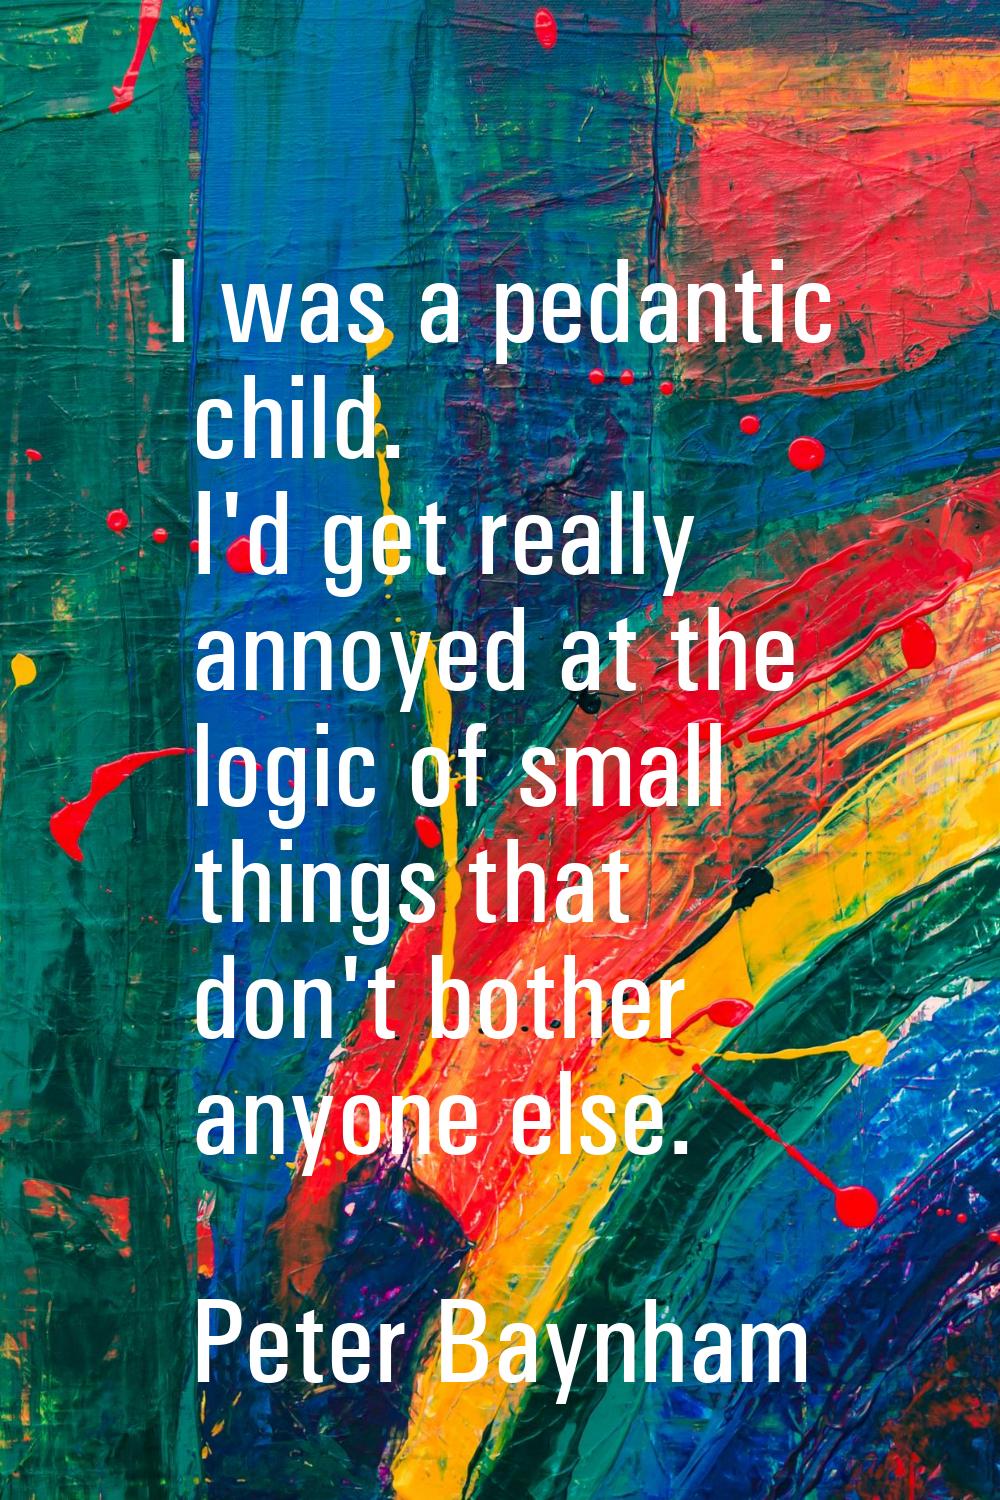 I was a pedantic child. I'd get really annoyed at the logic of small things that don't bother anyon